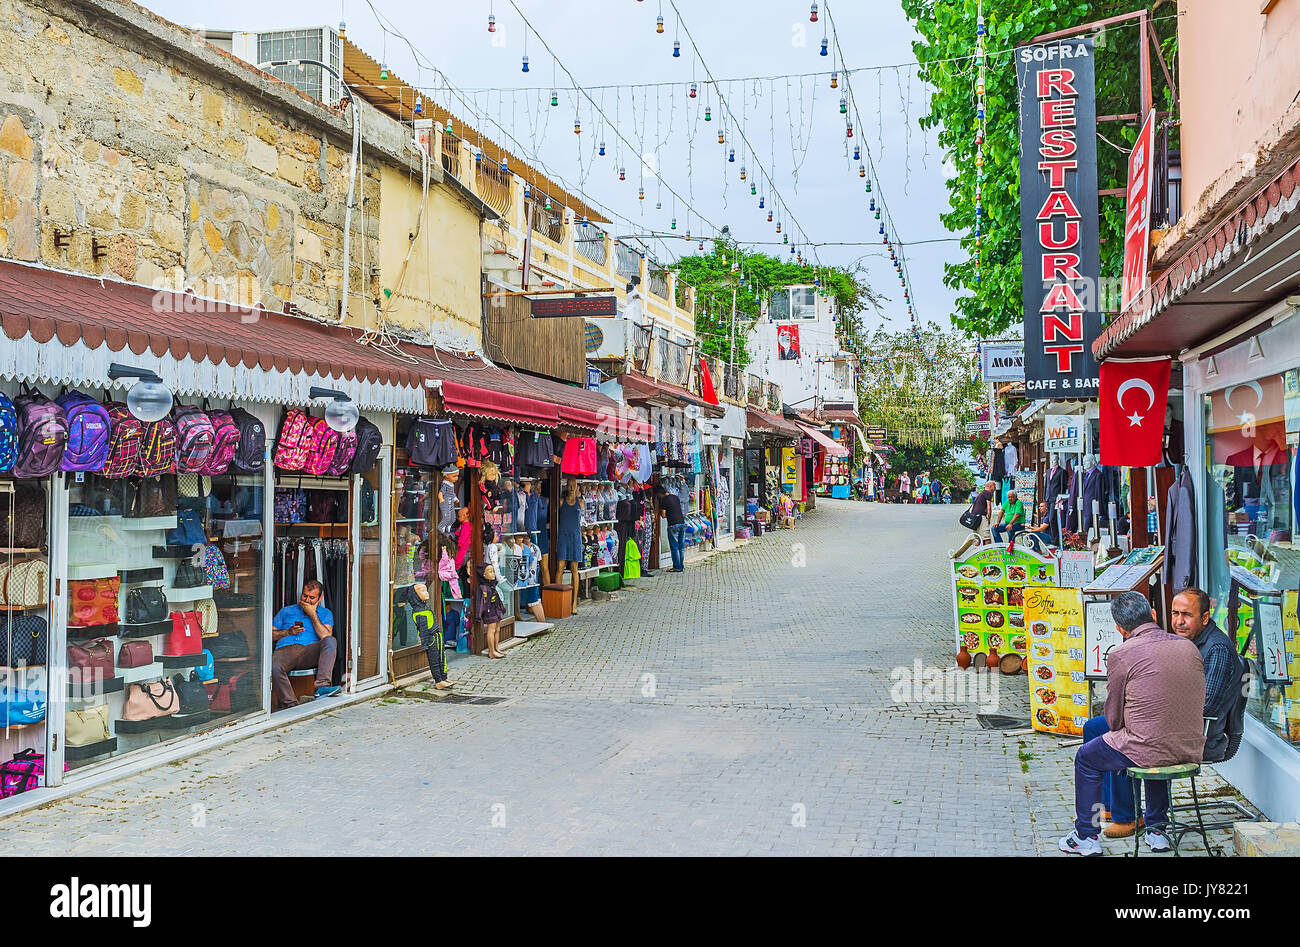 SIDE, TURKEY - MAY 8, 2017: The tourist market is important part of the Turkish cities and towns, even small resorts boasts large and interesting baza Stock Photo